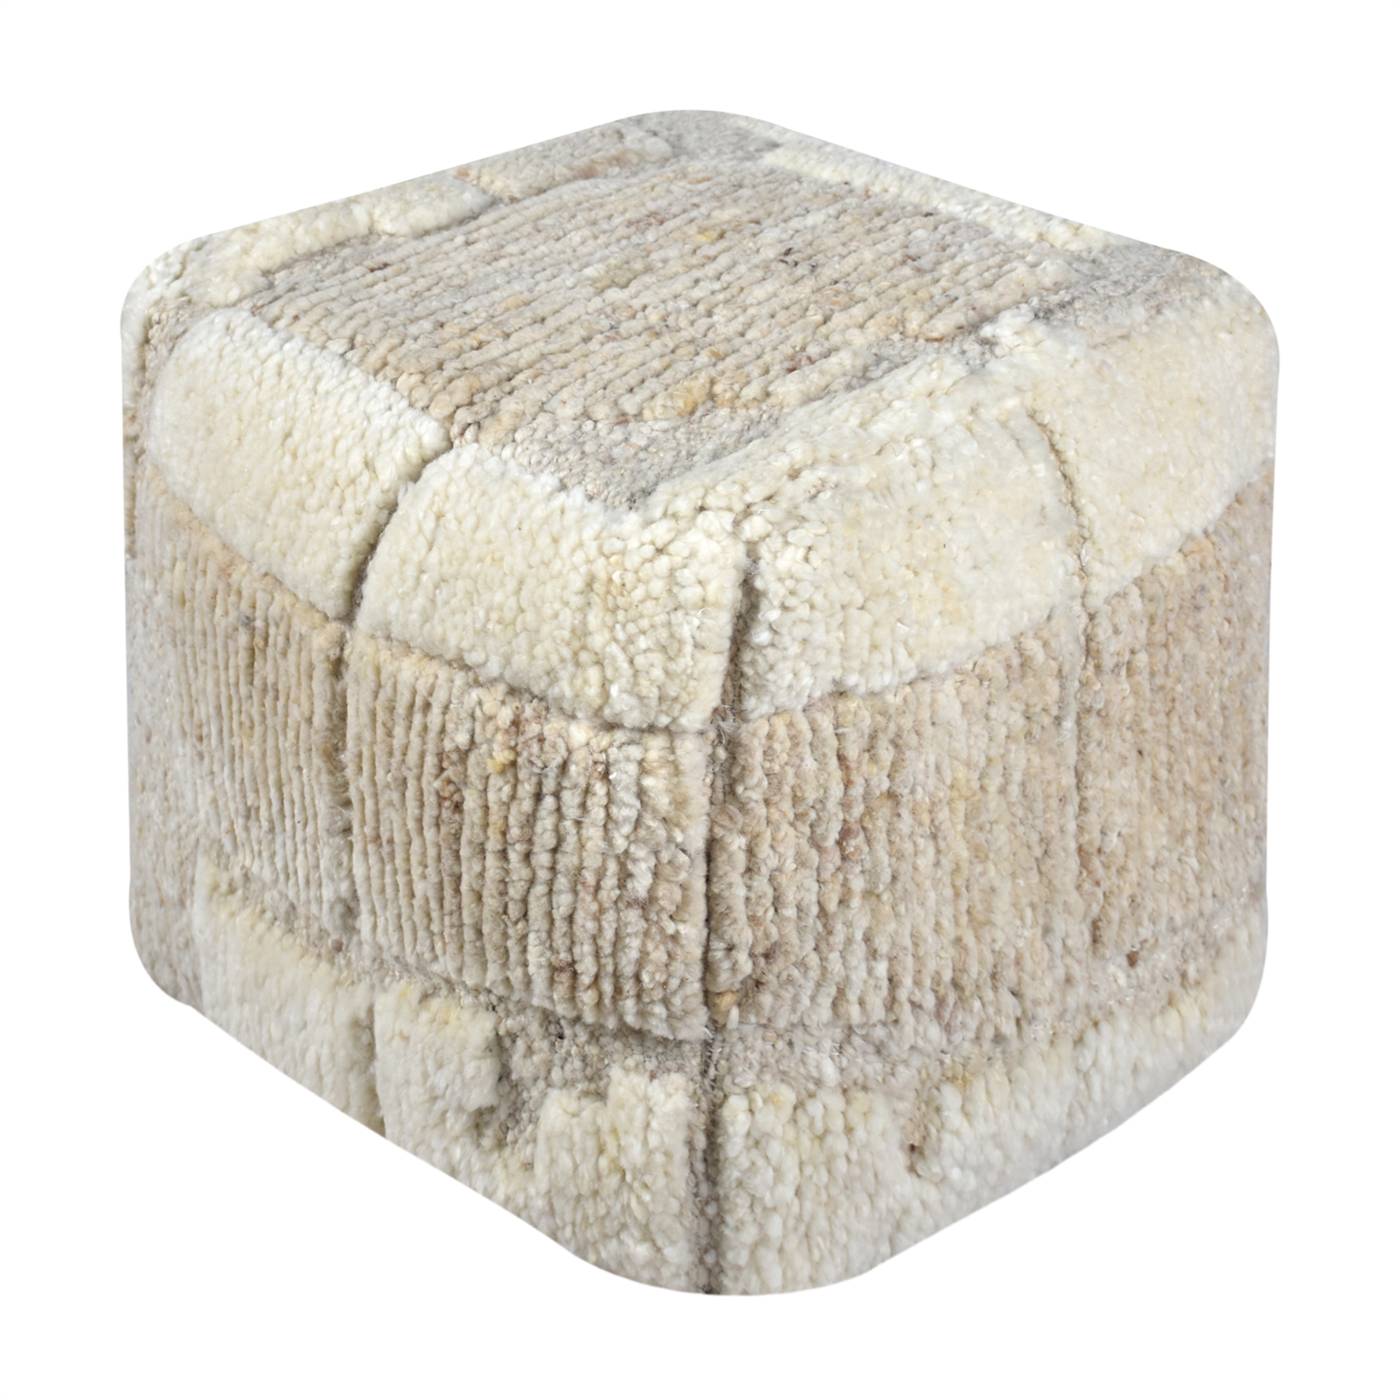 Larimer-II Pouf, 40x40x40 cm, Natural White, Beige, Wool, Hand Knotted, Handknotted, All Cut